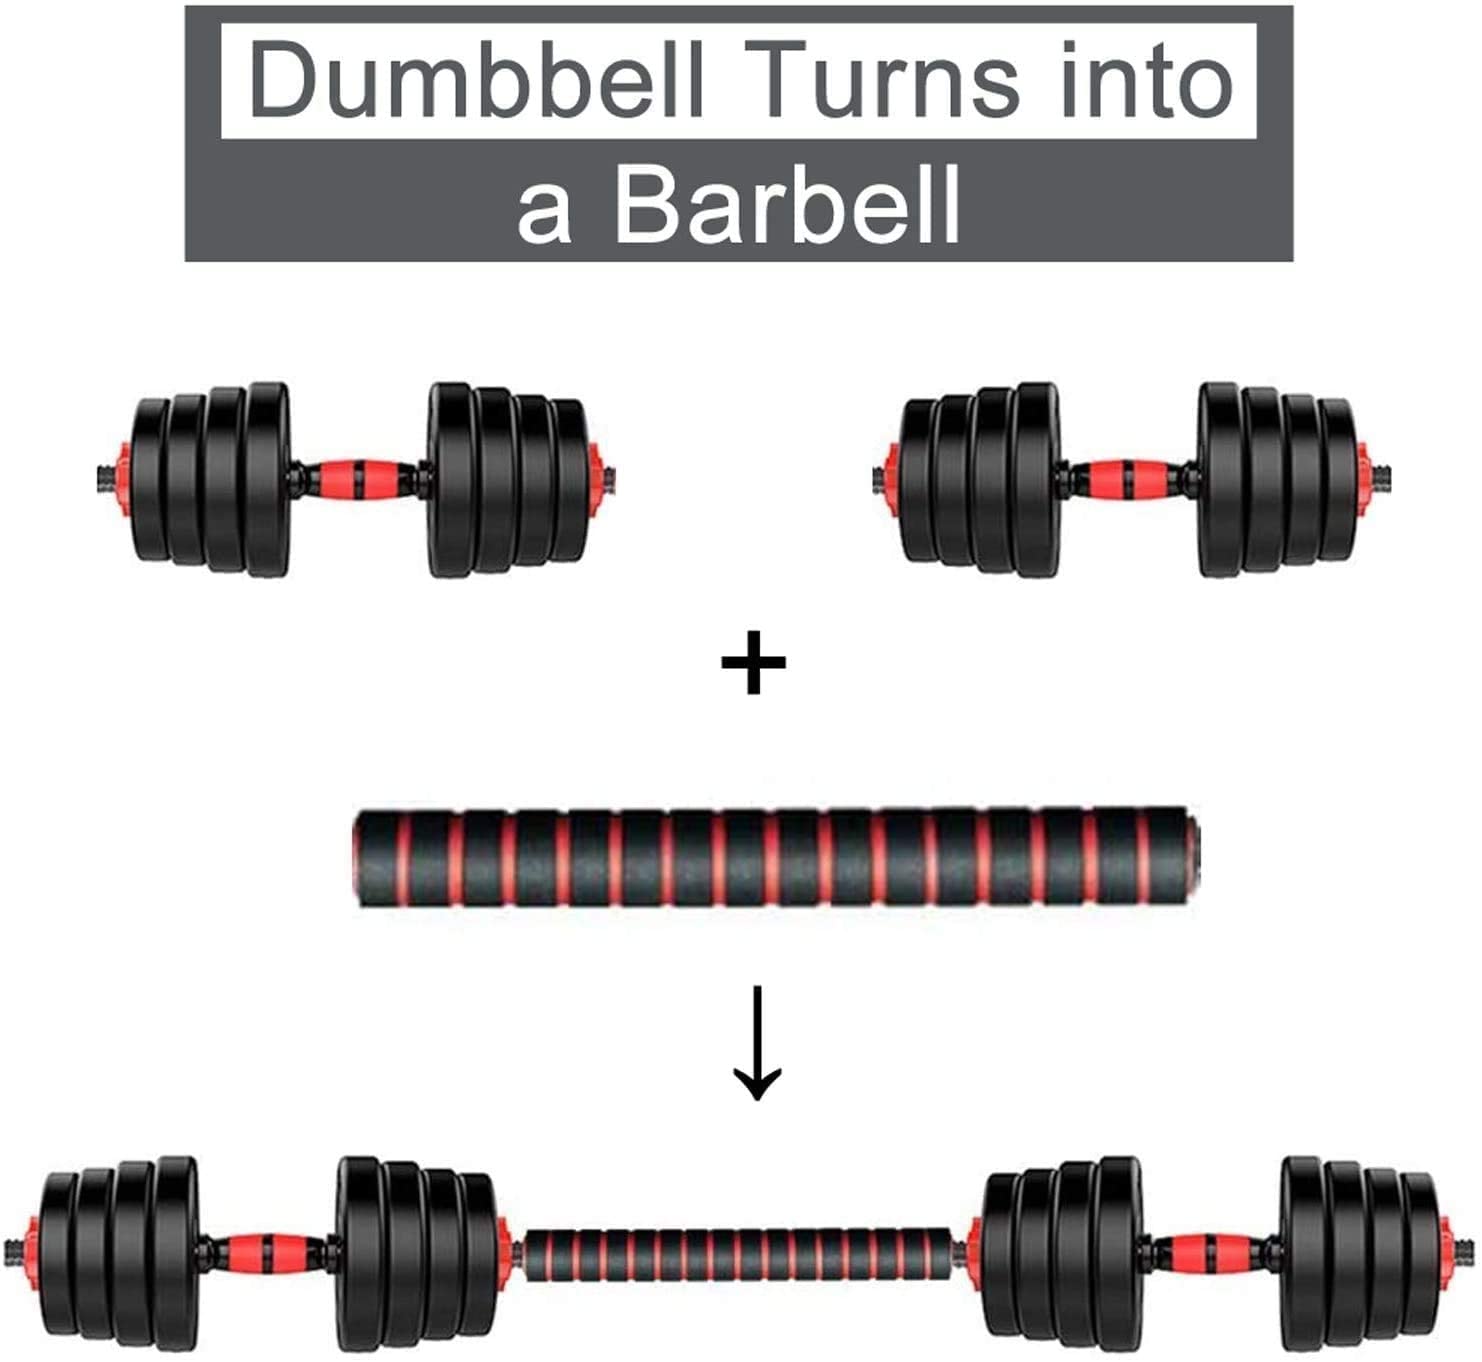 20kg dumbbell and Barbell Set Weightlifting fitness black cement steel rubber adjustable 20kgdumbbell and Barbell Set 2 in 1